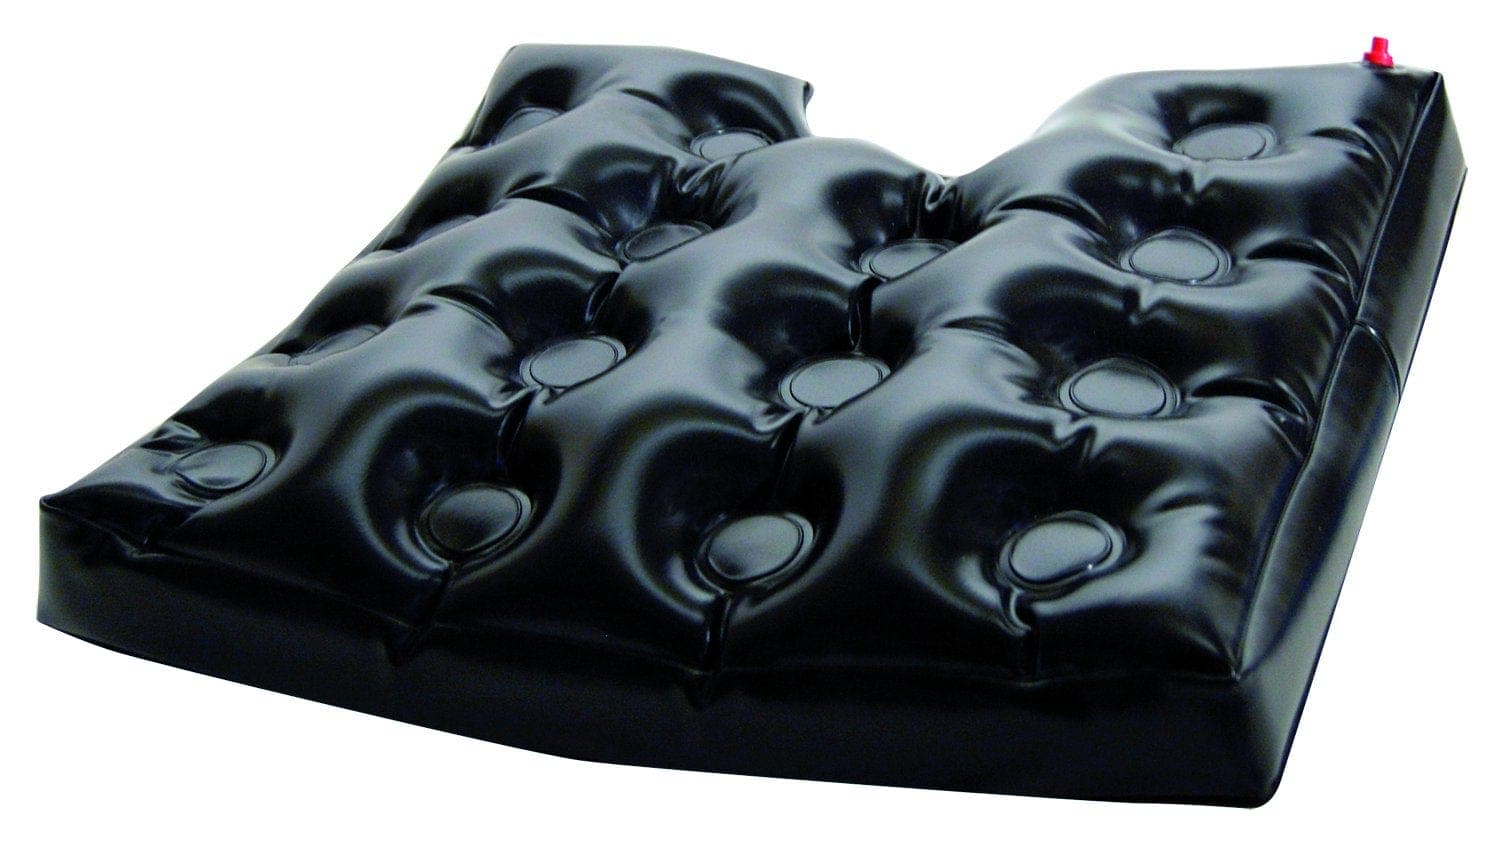 SkilCare Cushions Coccyx Cutout and LSII / 16" SkilCare Foam Air 16" Cushion w/Coccyx Cutout and LSII Cover